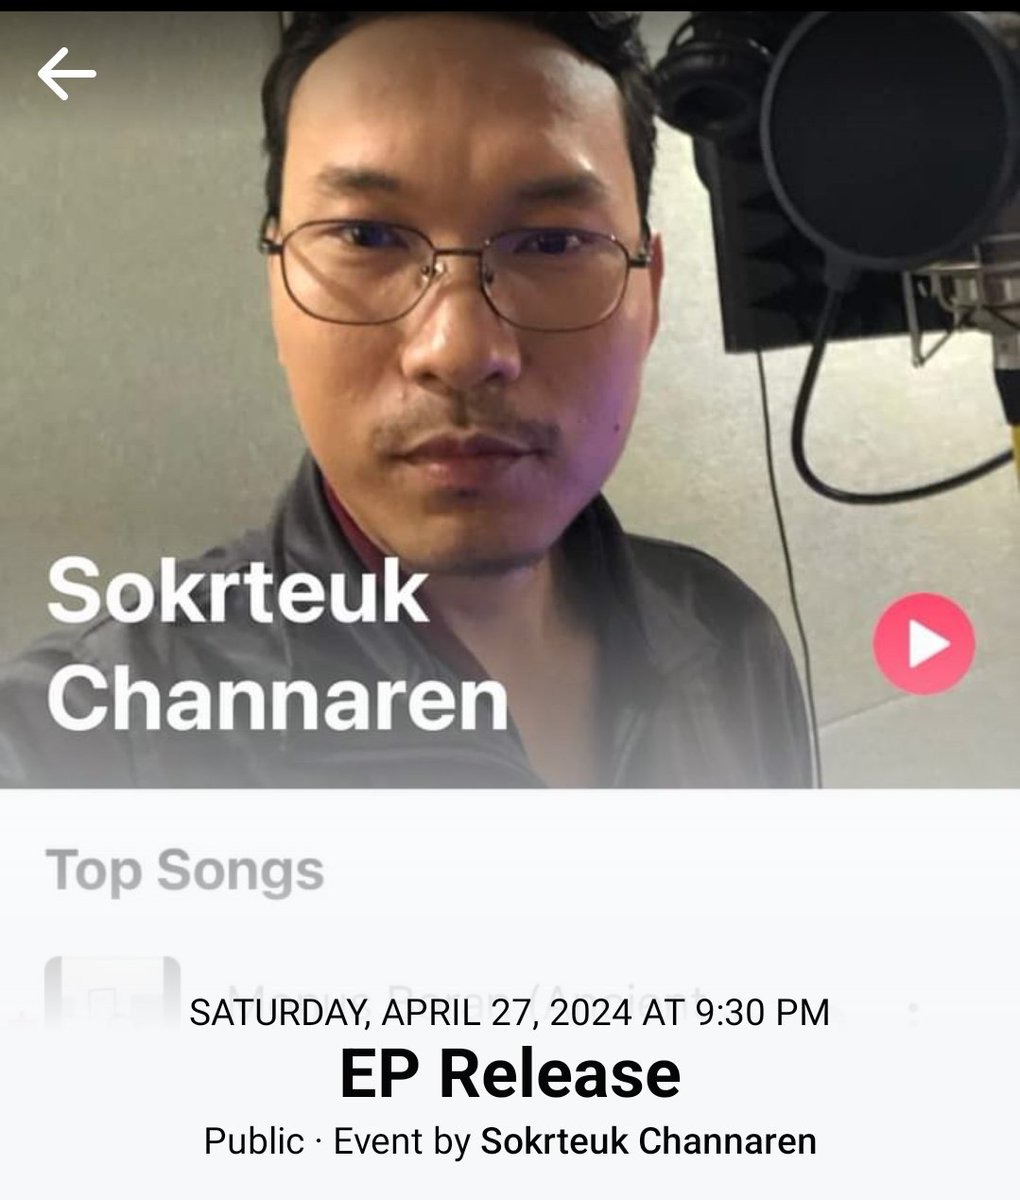 EP Release, April 27, 2024
9:30 PM (GMT +7) worldwide
on music streaming service

#SokrteukChannaren
#EP
#MeAndLove